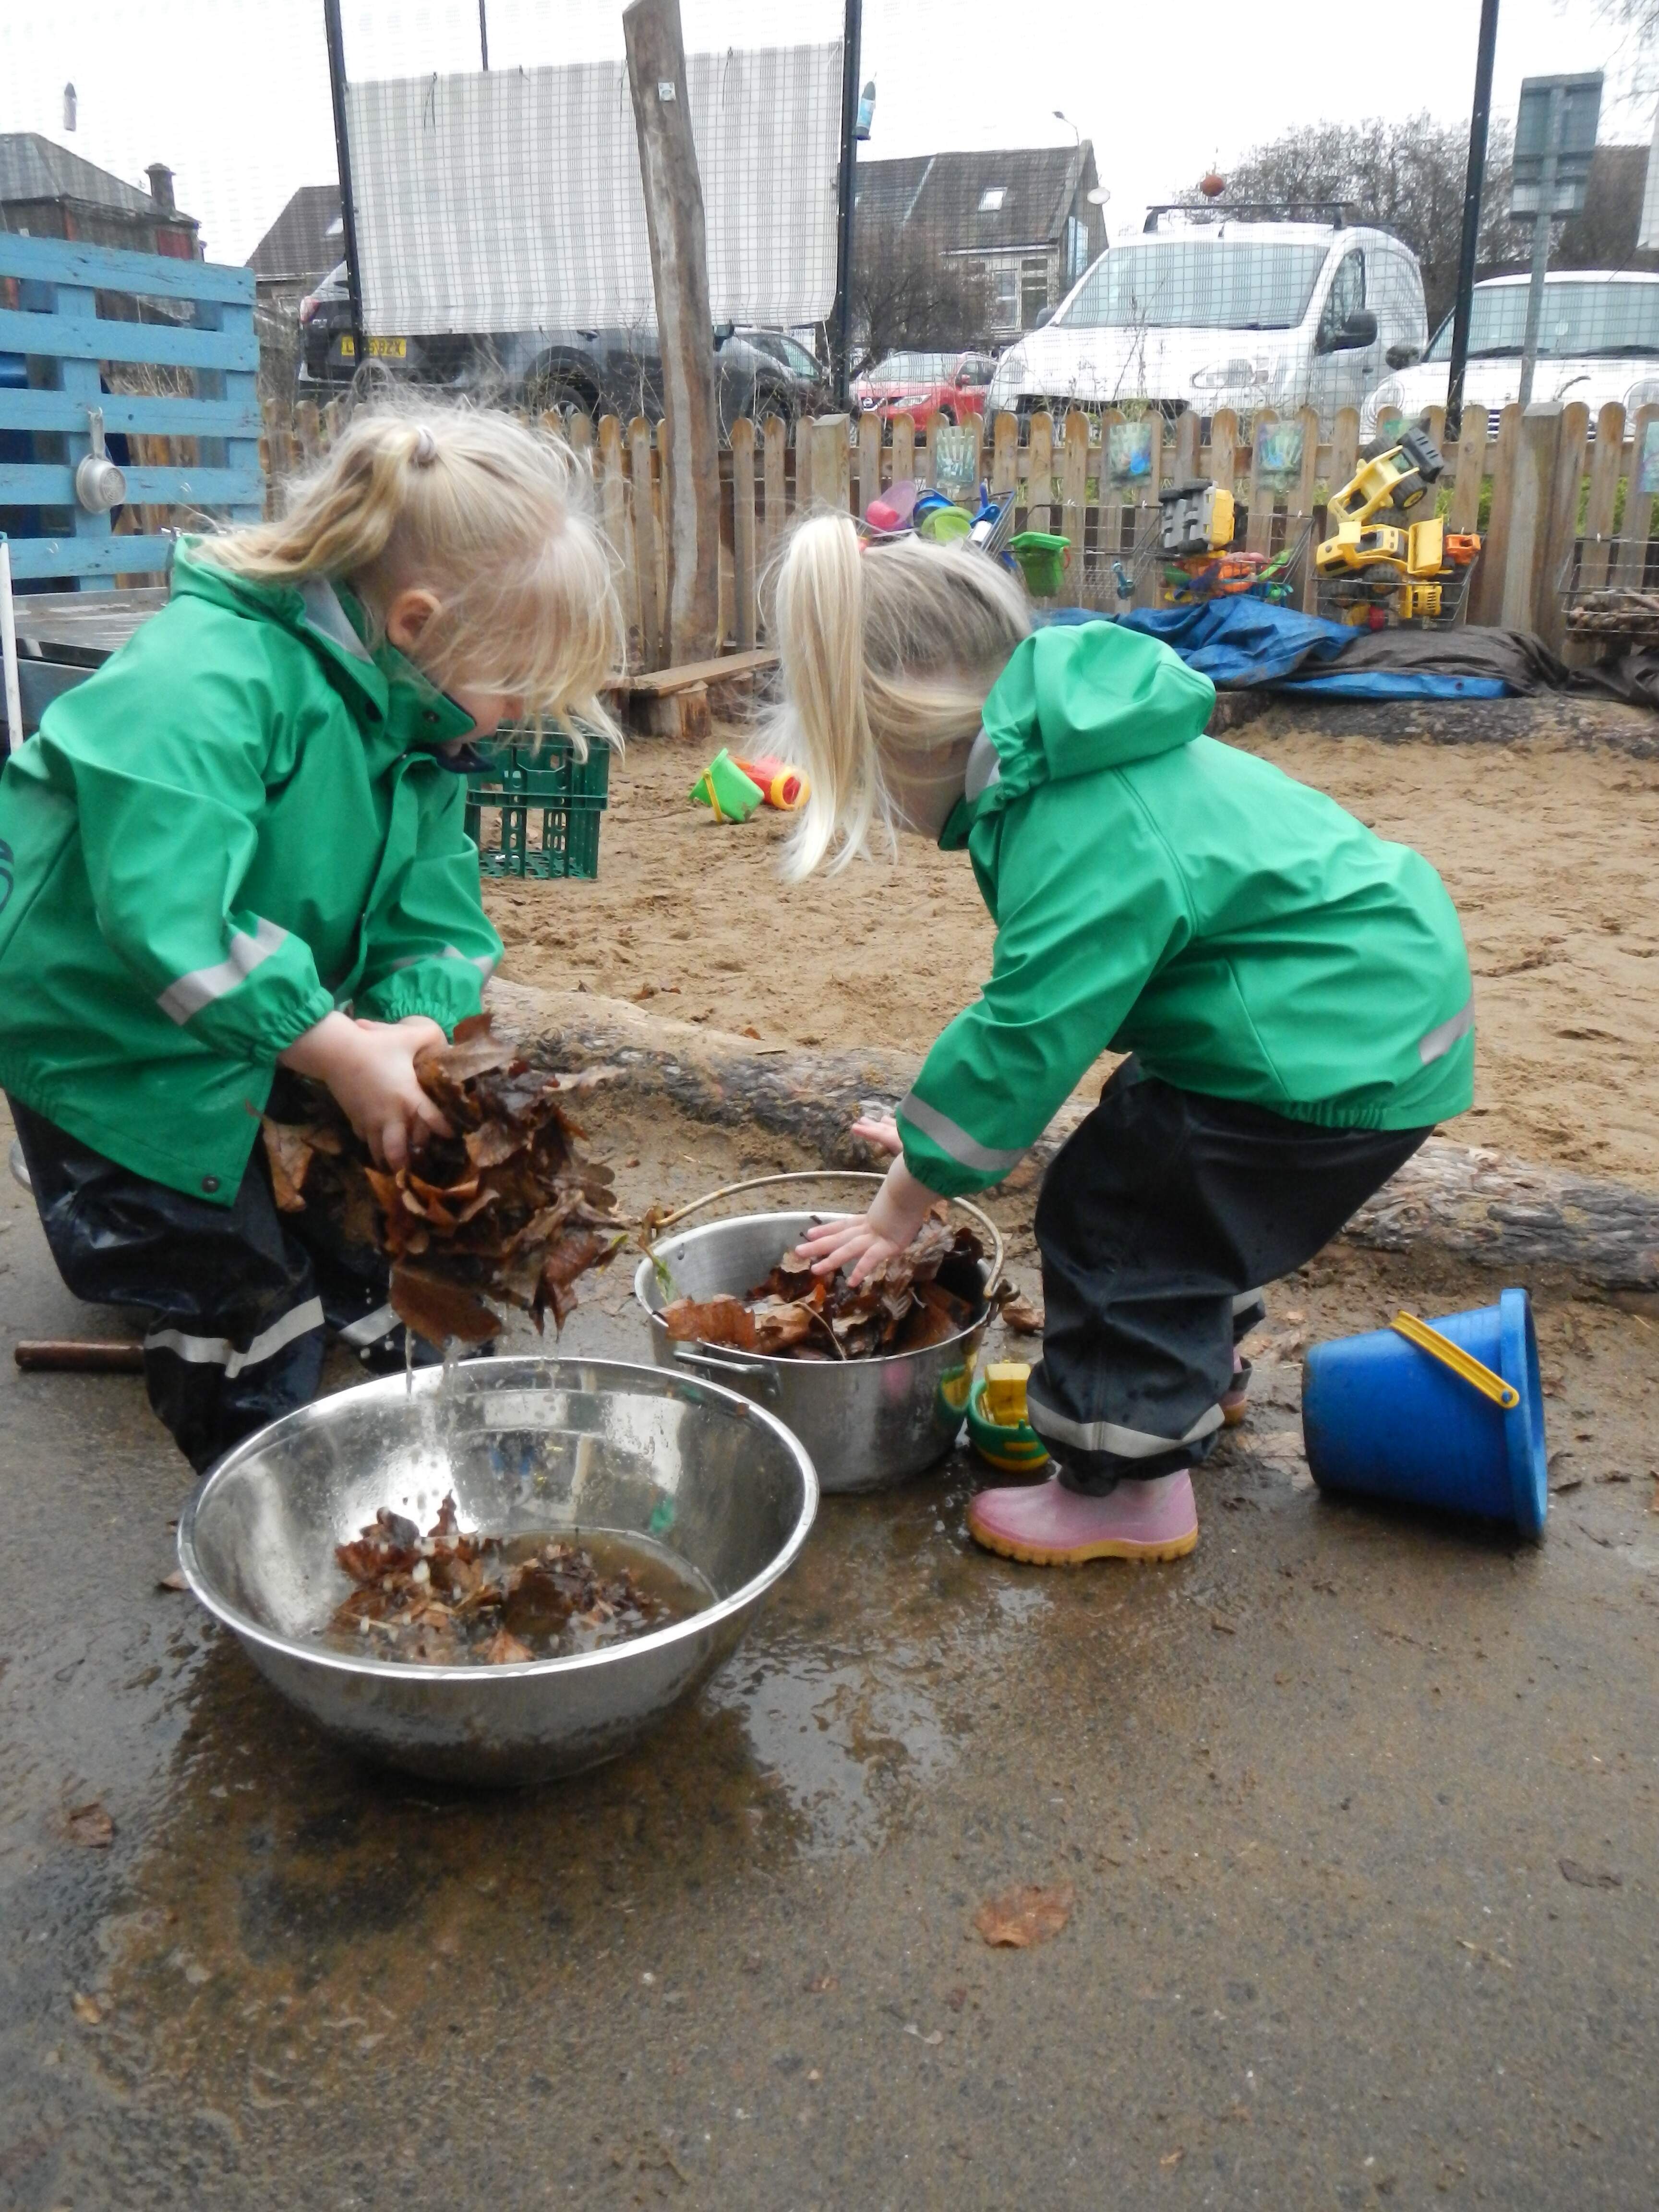 children playing outdoors in nursery